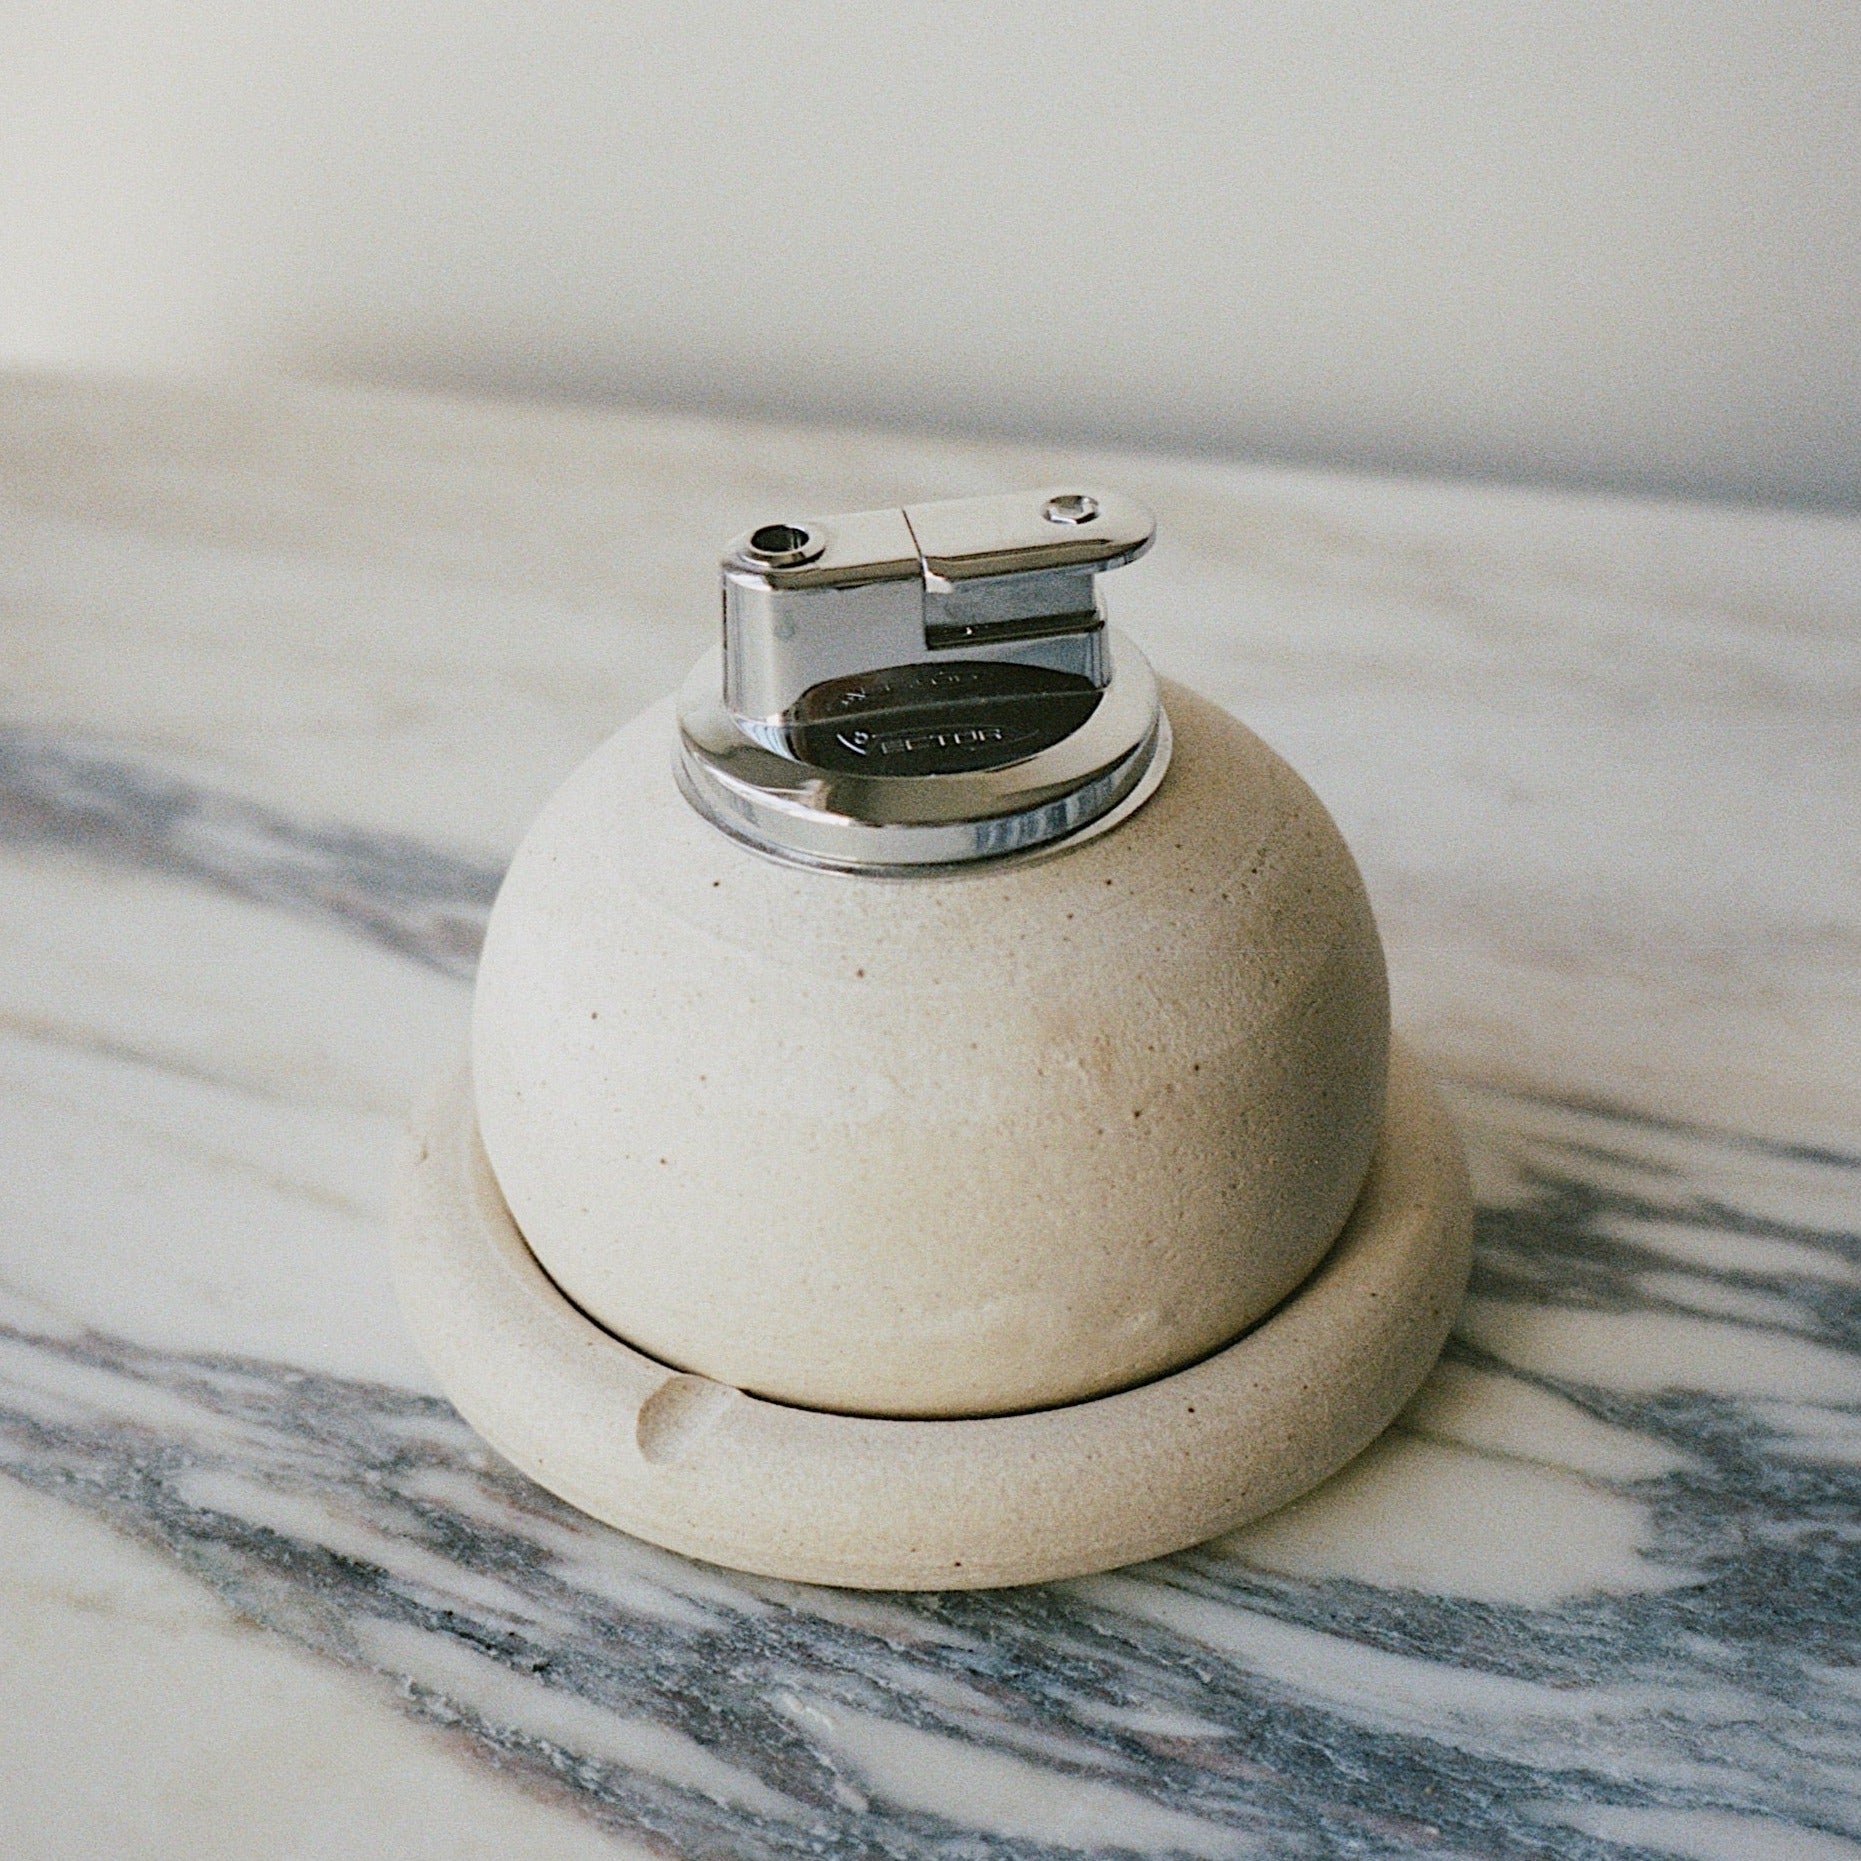 creme/stone white table ligher and ashtray. handmade ceramic table lighter and ash tray. pebble lighter. 